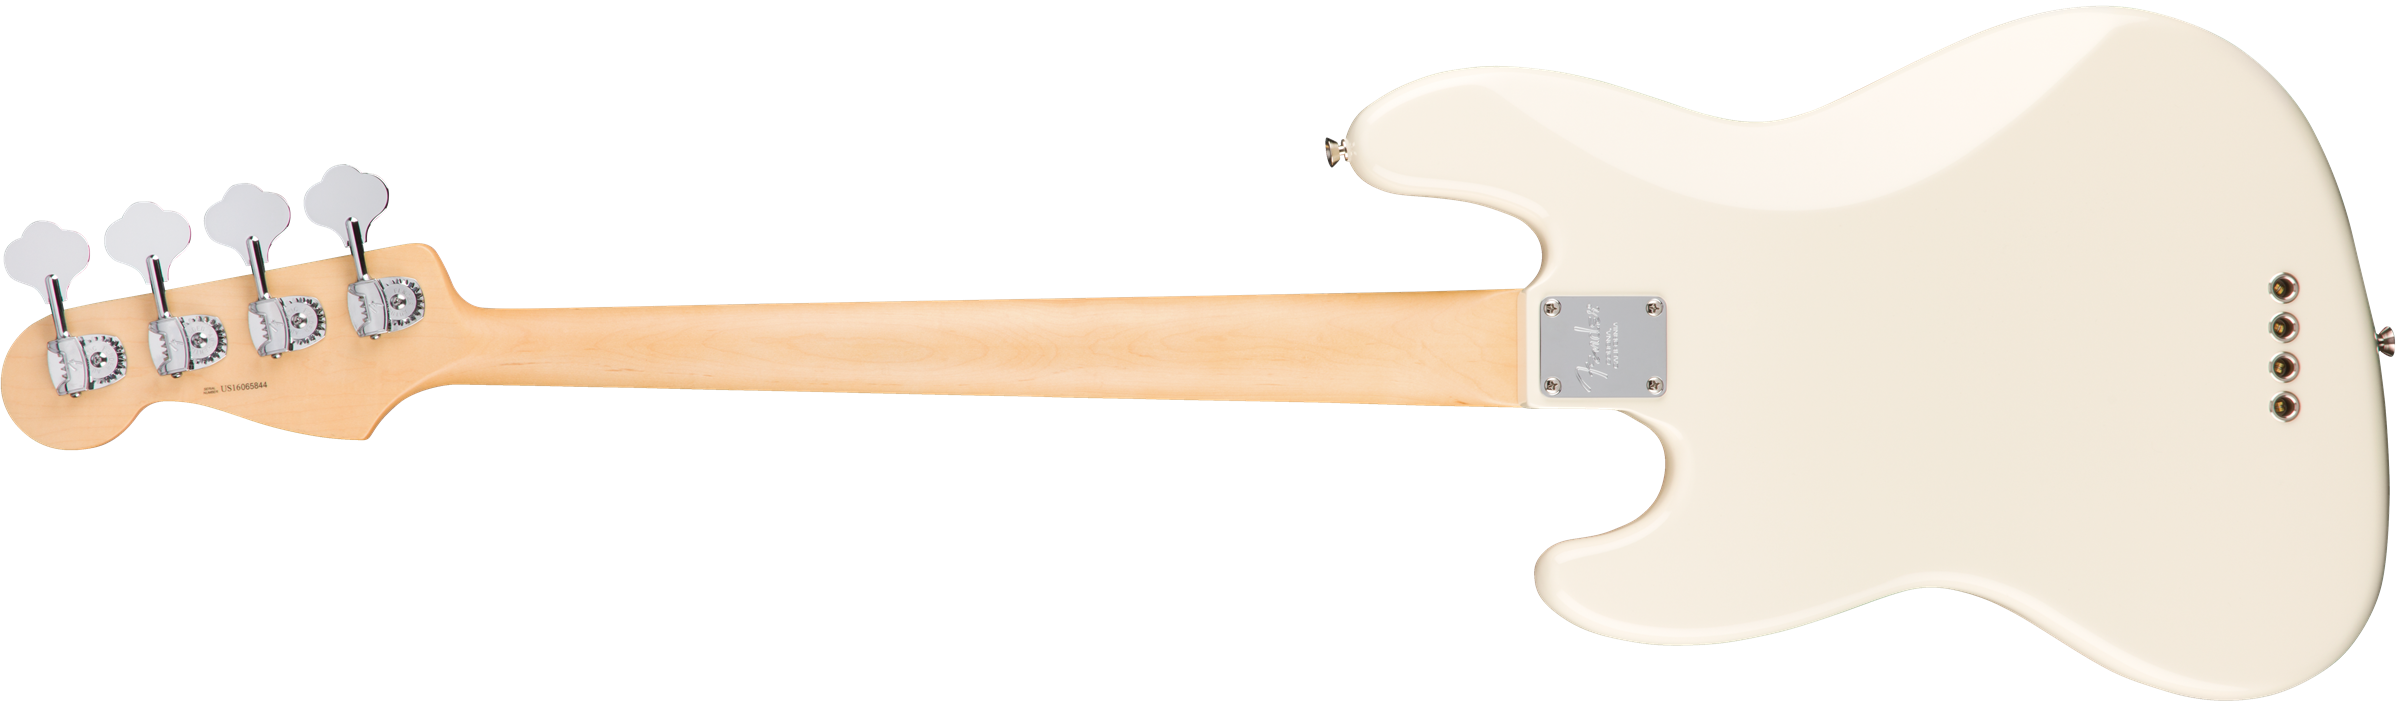 Fender Jazz Bass American Professional 2017 Usa  Mn - Olympic White - Basse Électrique Solid Body - Variation 1